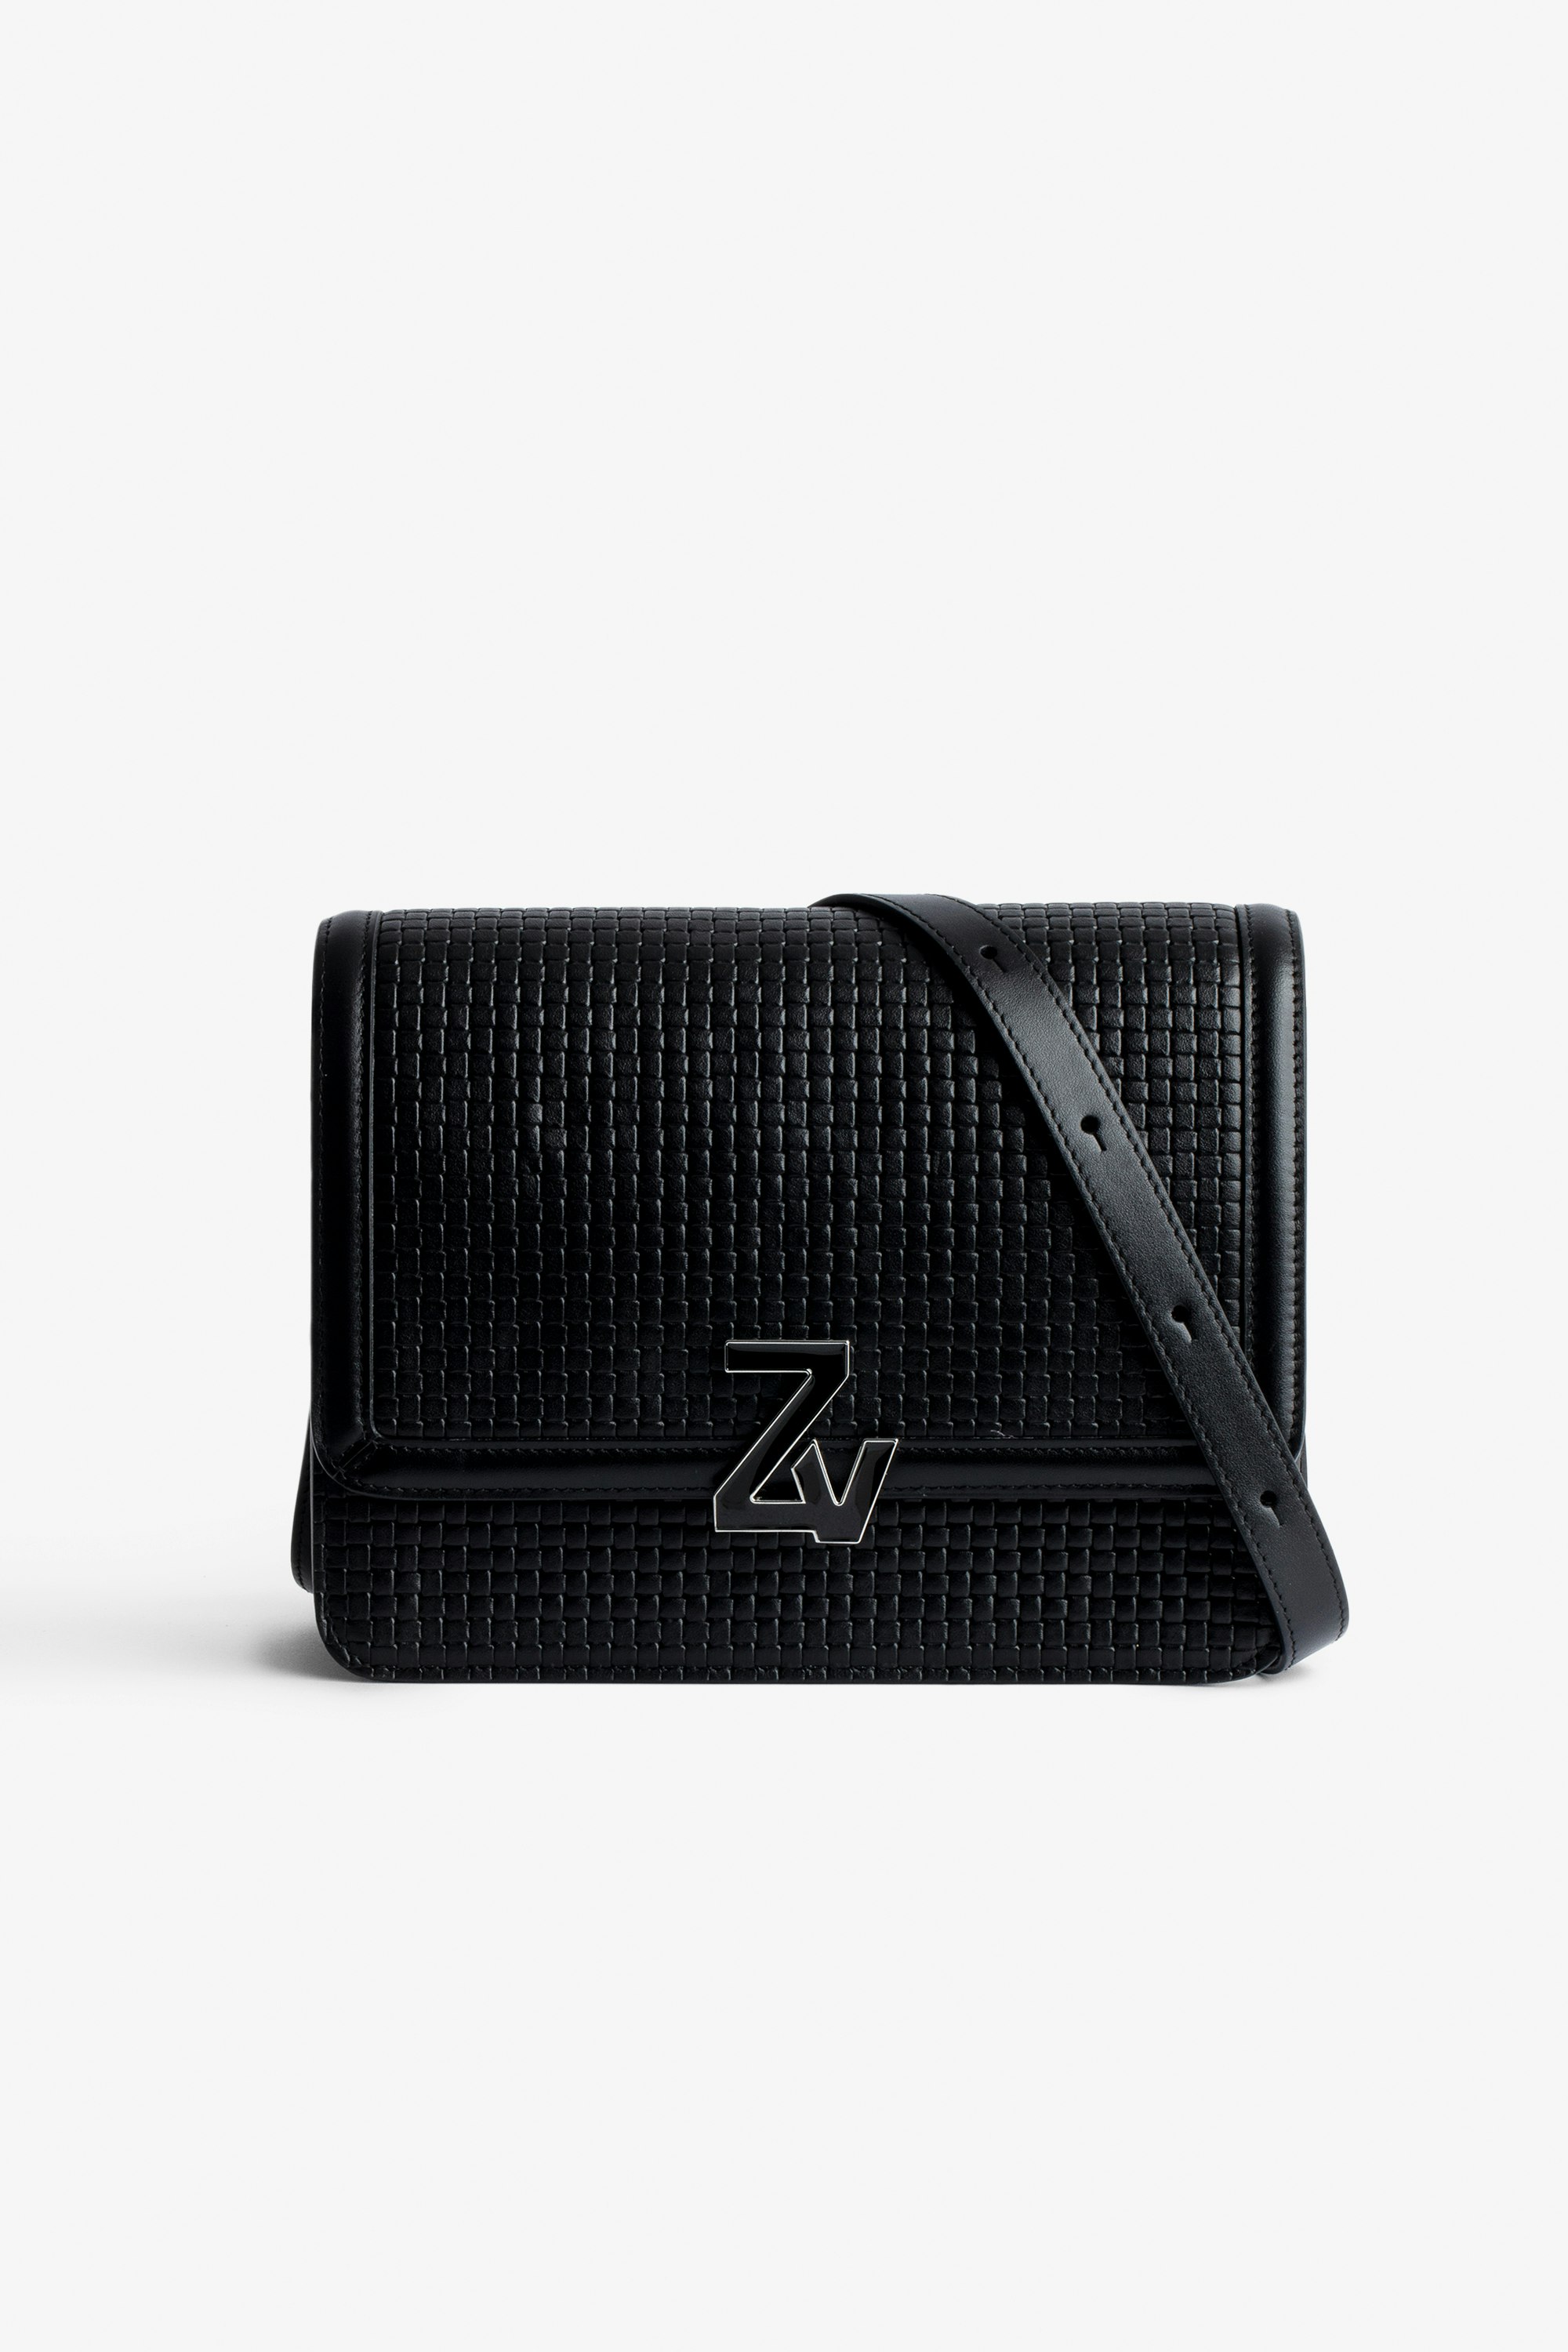 ZV Initiale Le City Bag Women’s bag in black latticework leather with a shoulder strap and ZV clasp